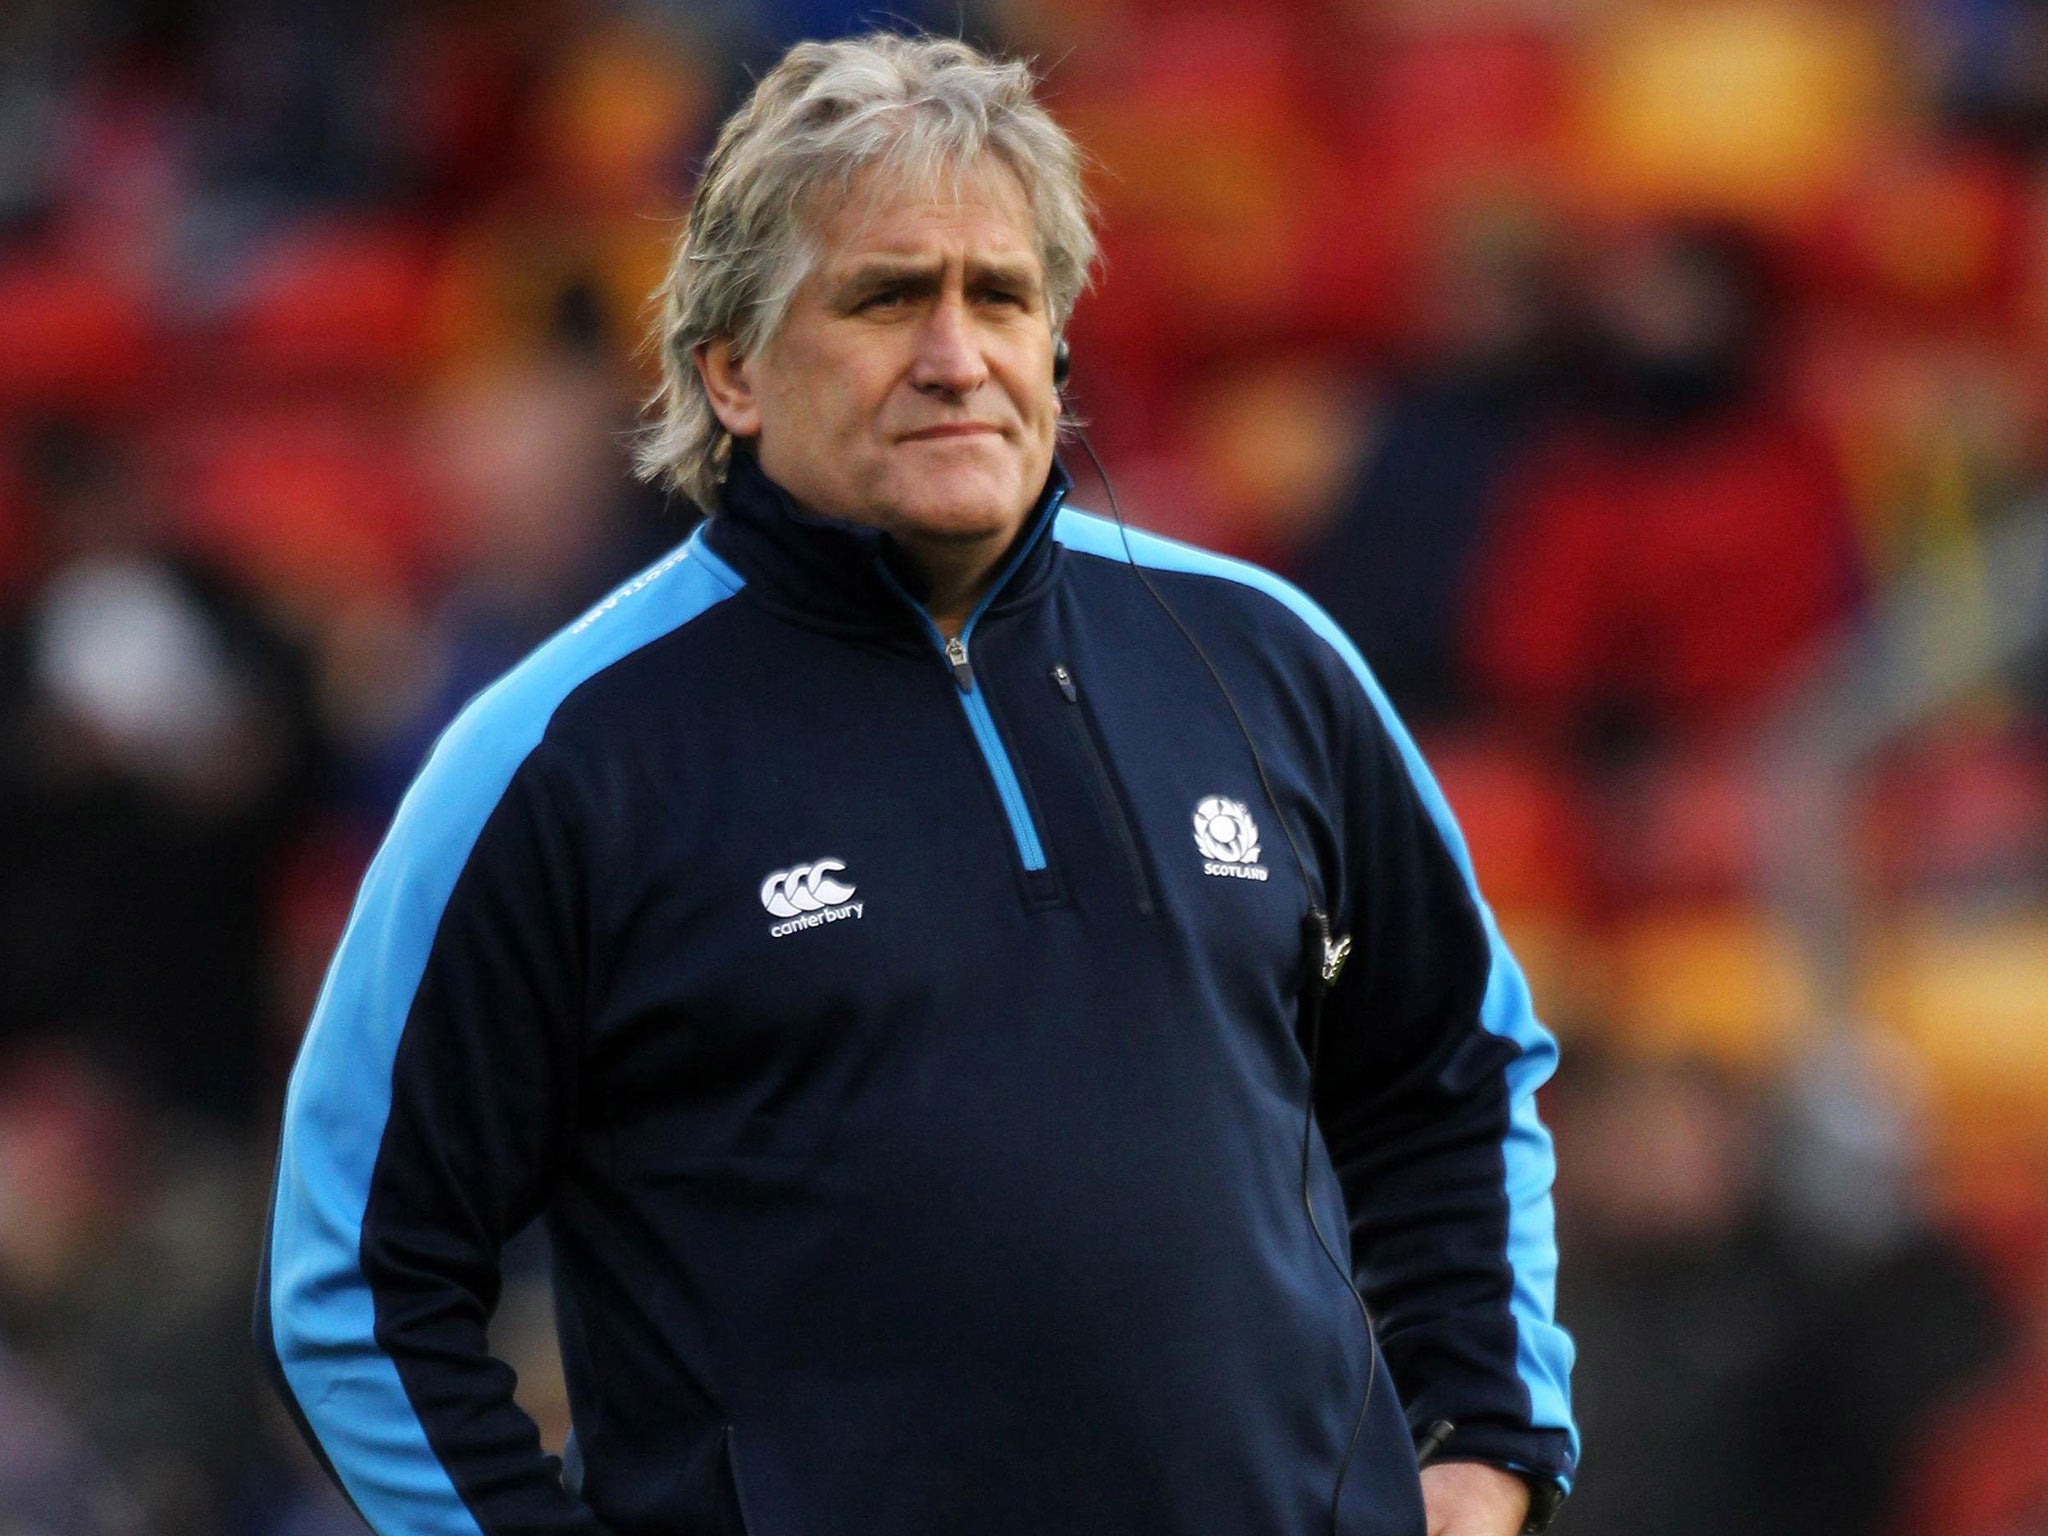 Scott Johnson failed to win a match when in charge of Wales in 2006